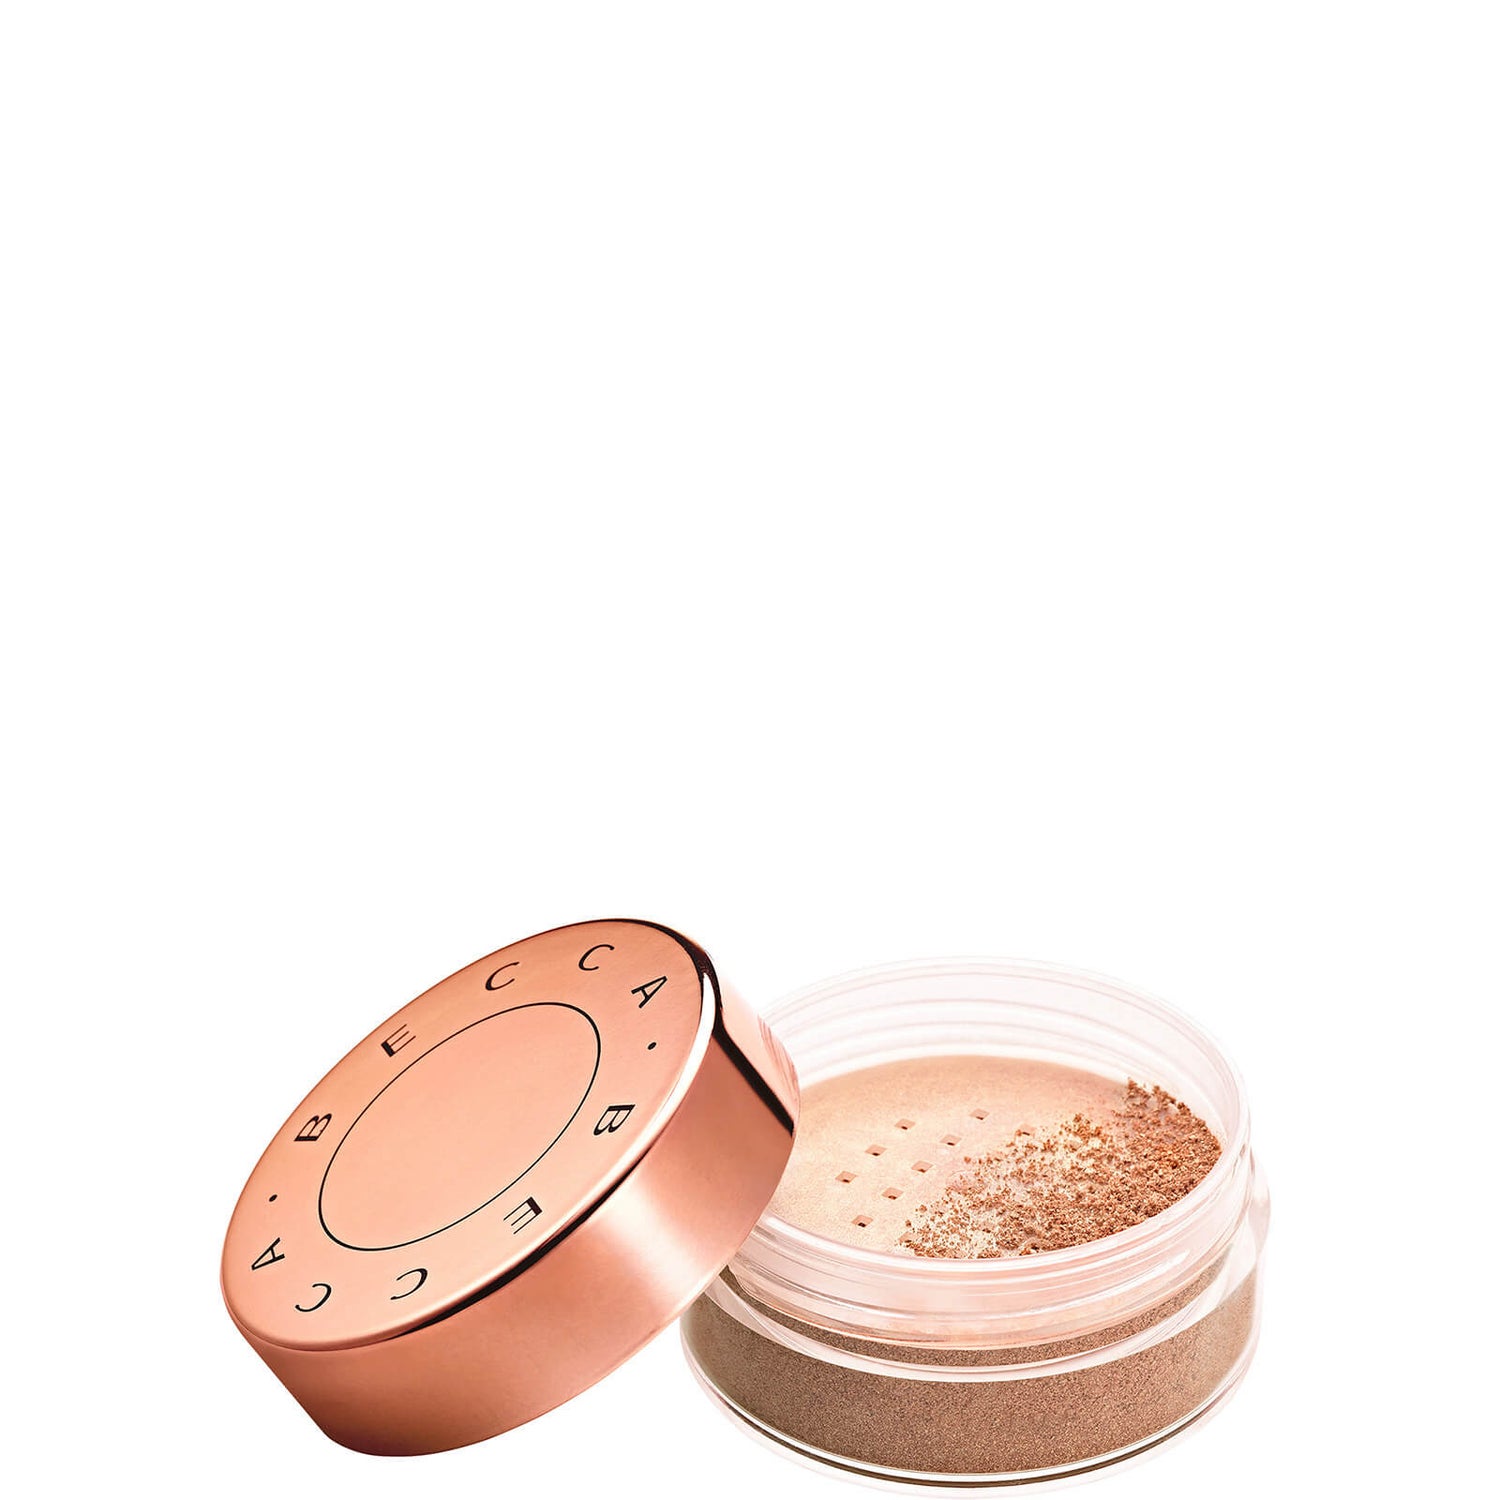 BECCA Collector's Edition Glow Dust Highlighter - Champagne Pop (0.53 oz.)